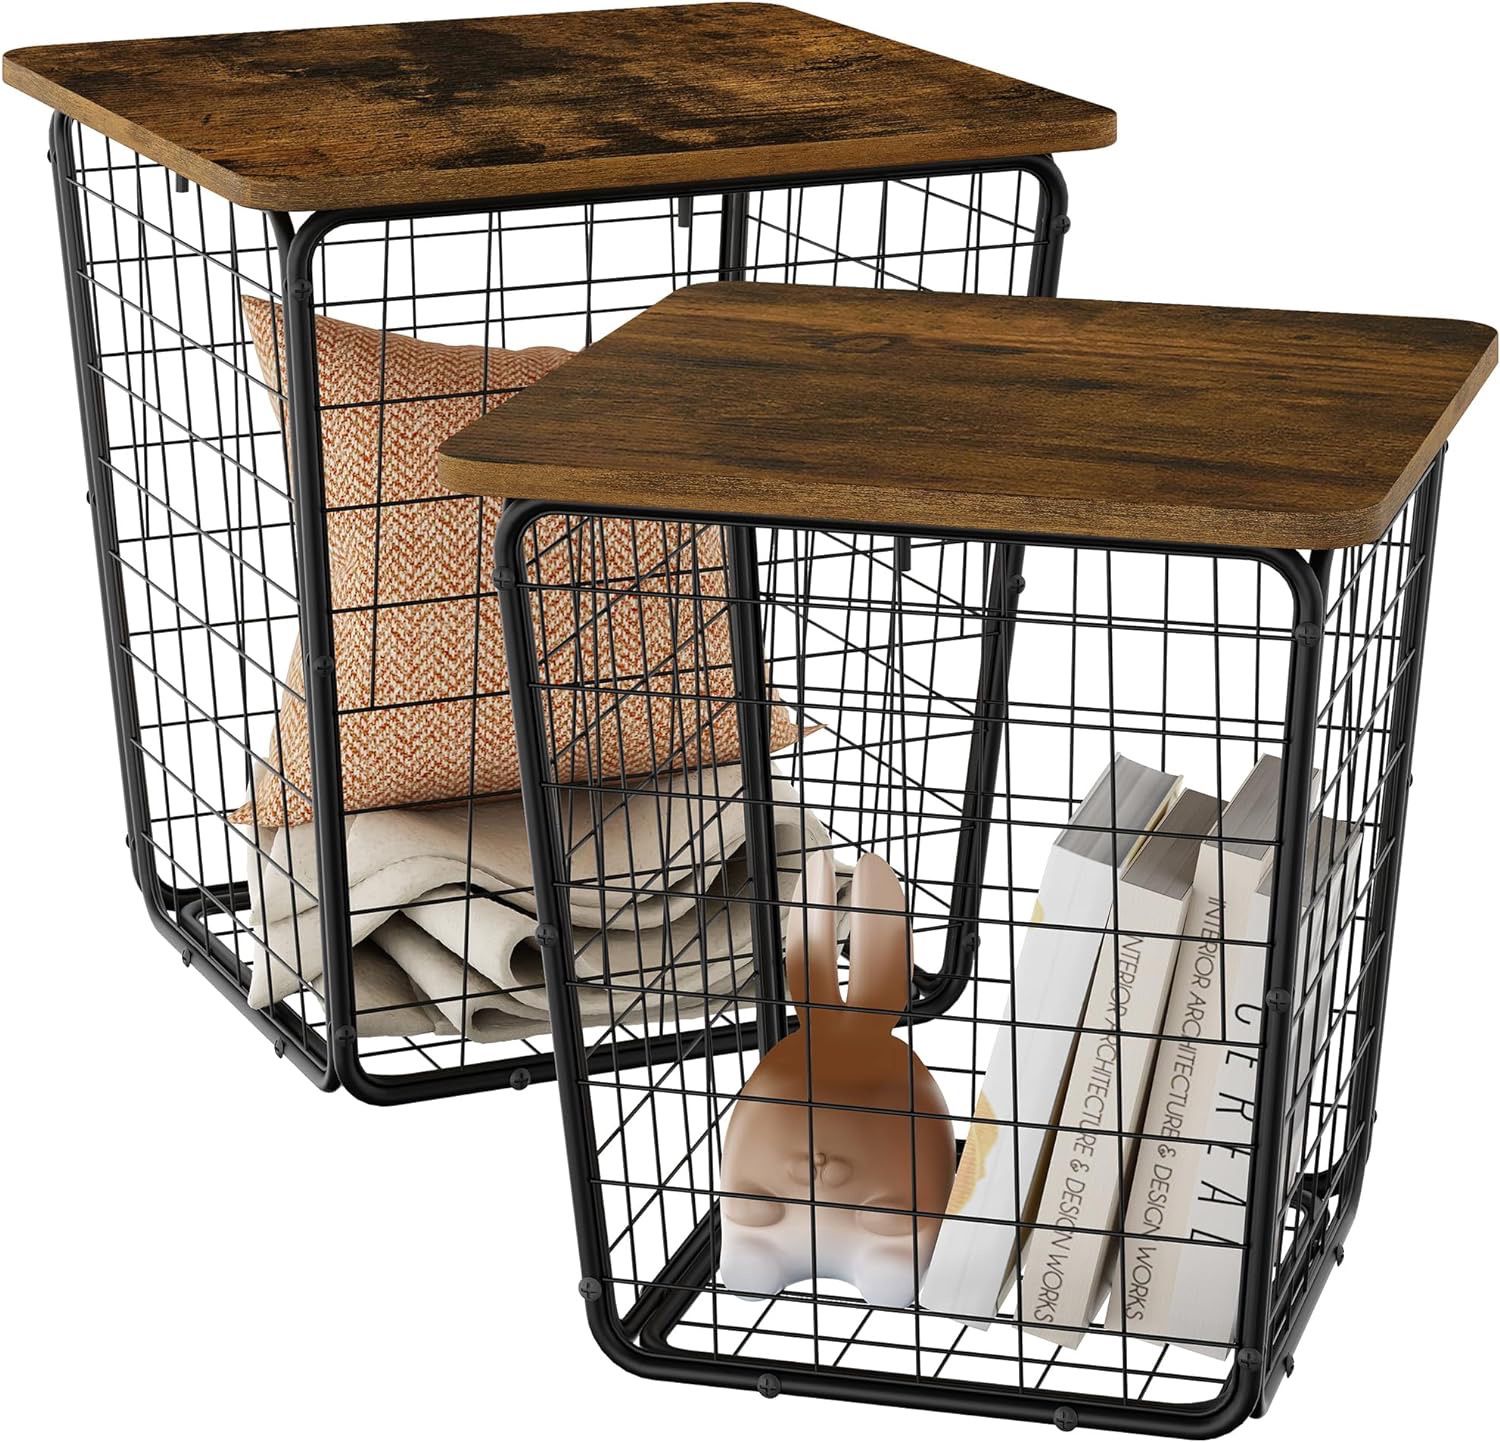 Nesting Coffee Table with Storage - Set of 2 Side with Wire Basket Industrial Farmhouse Style End Tables for Living Room Bedroom Balcony Office Nights